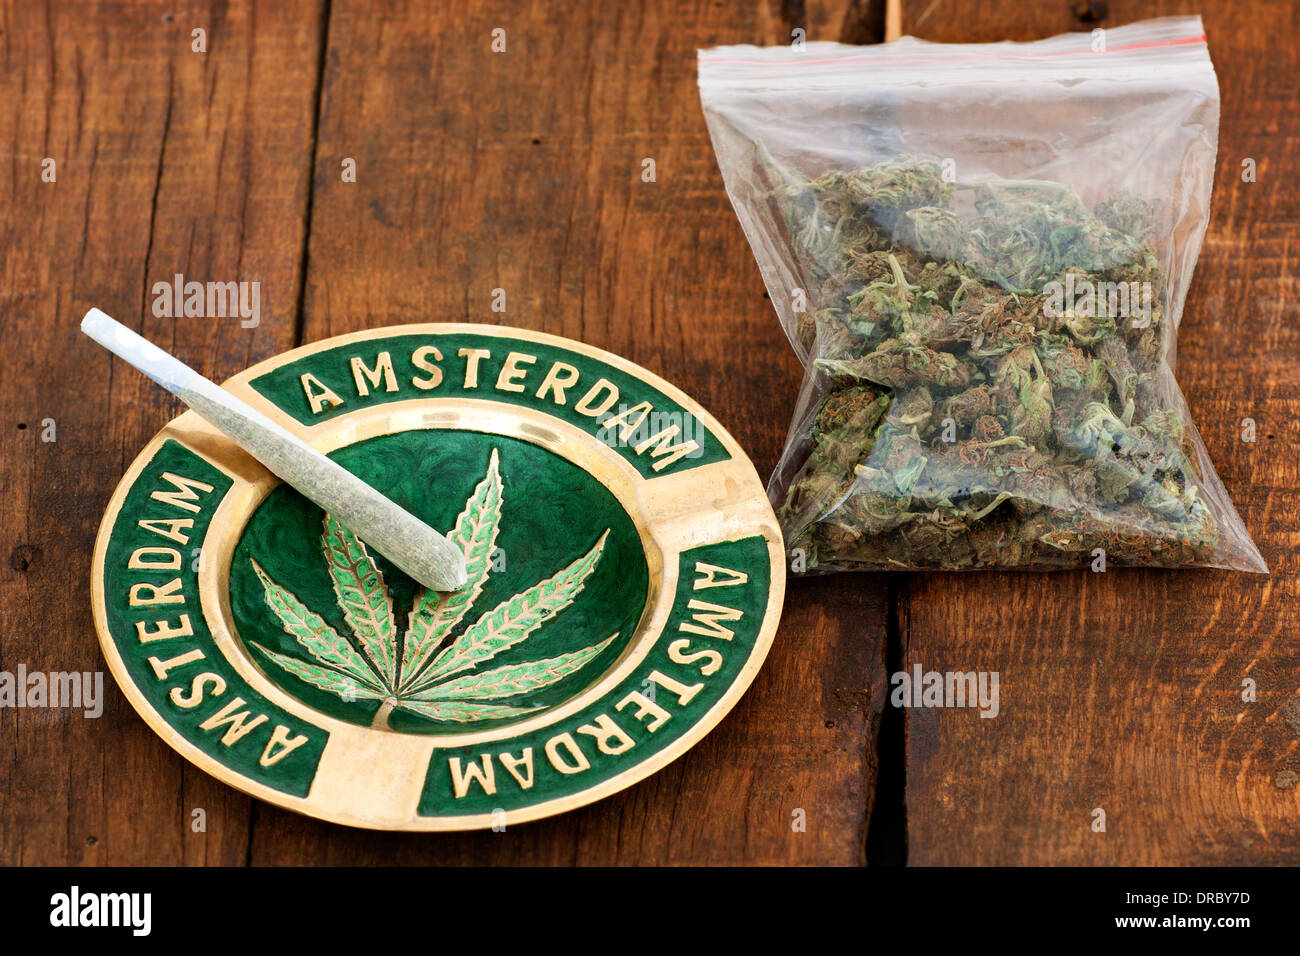 Marijuana Joint in an ashtray with amsterdam sign and a big plastic bag of weed on wooden background Stock Photo